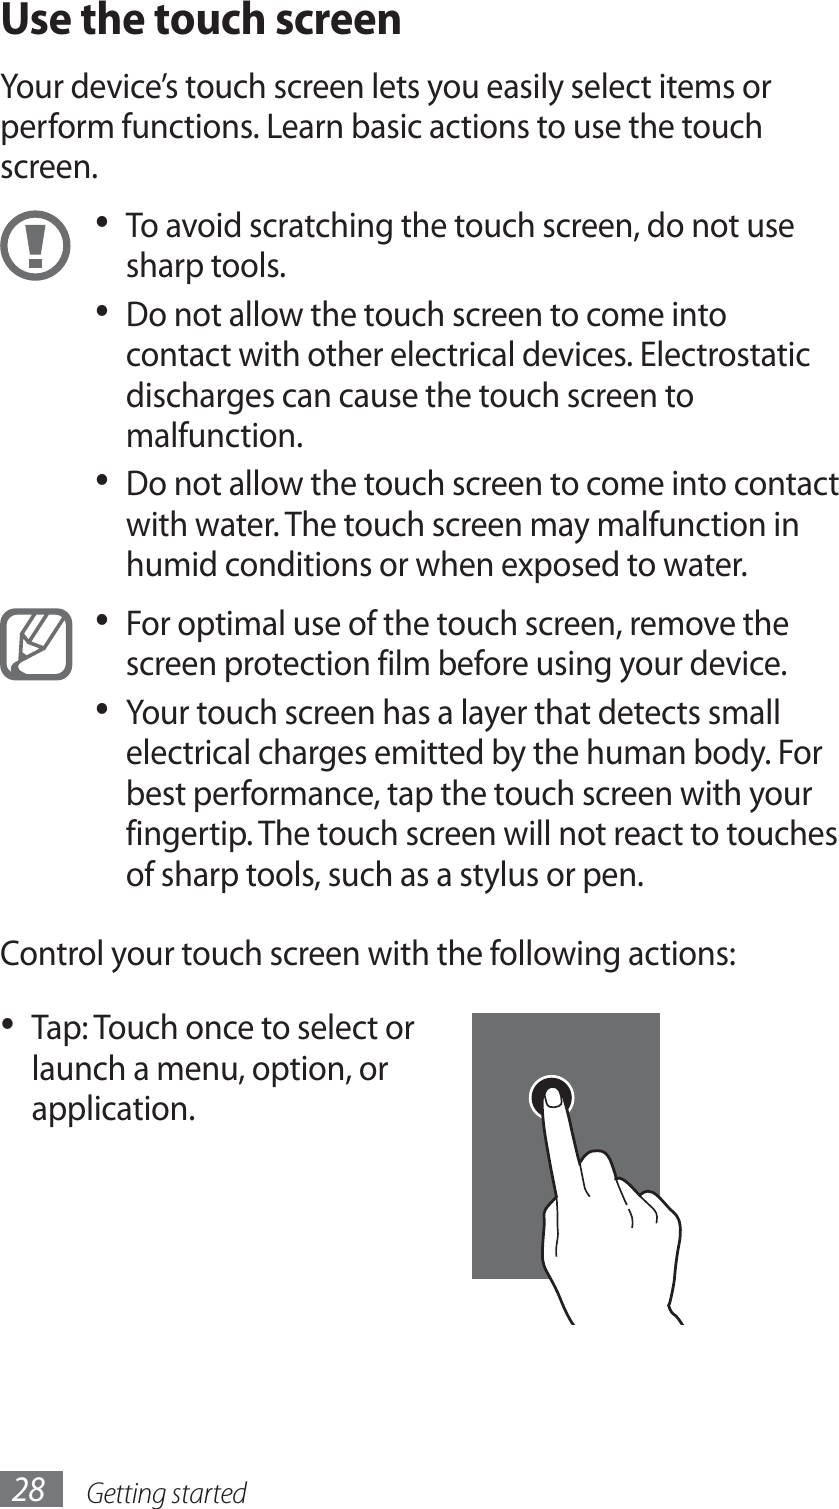 Getting started28Use the touch screenYour device’s touch screen lets you easily select items or perform functions. Learn basic actions to use the touch screen.To avoid scratching the touch screen, do not use • sharp tools.Do not allow the touch screen to come into • contact with other electrical devices. Electrostatic discharges can cause the touch screen to malfunction.Do not allow the touch screen to come into contact • with water. The touch screen may malfunction in humid conditions or when exposed to water. For optimal use of the touch screen, remove the • screen protection film before using your device.Your touch screen has a layer that detects small • electrical charges emitted by the human body. For best performance, tap the touch screen with your fingertip. The touch screen will not react to touches of sharp tools, such as a stylus or pen. Control your touch screen with the following actions:Tap: Touch once to select or • launch a menu, option, or application.